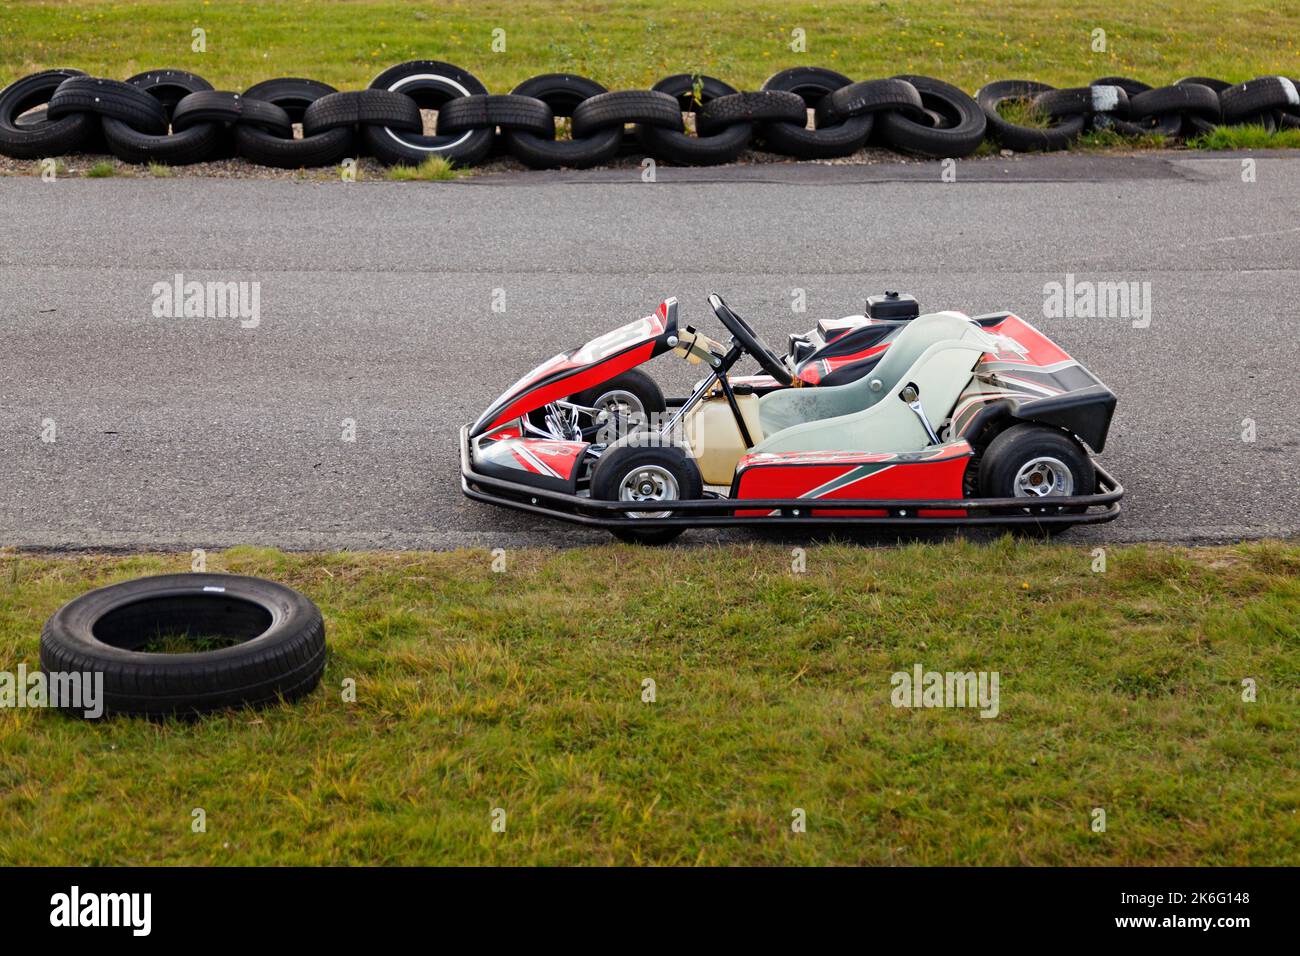 Umea, Norrland Sweden - August 30, 2020: a go-kart standing on the race track Stock Photo